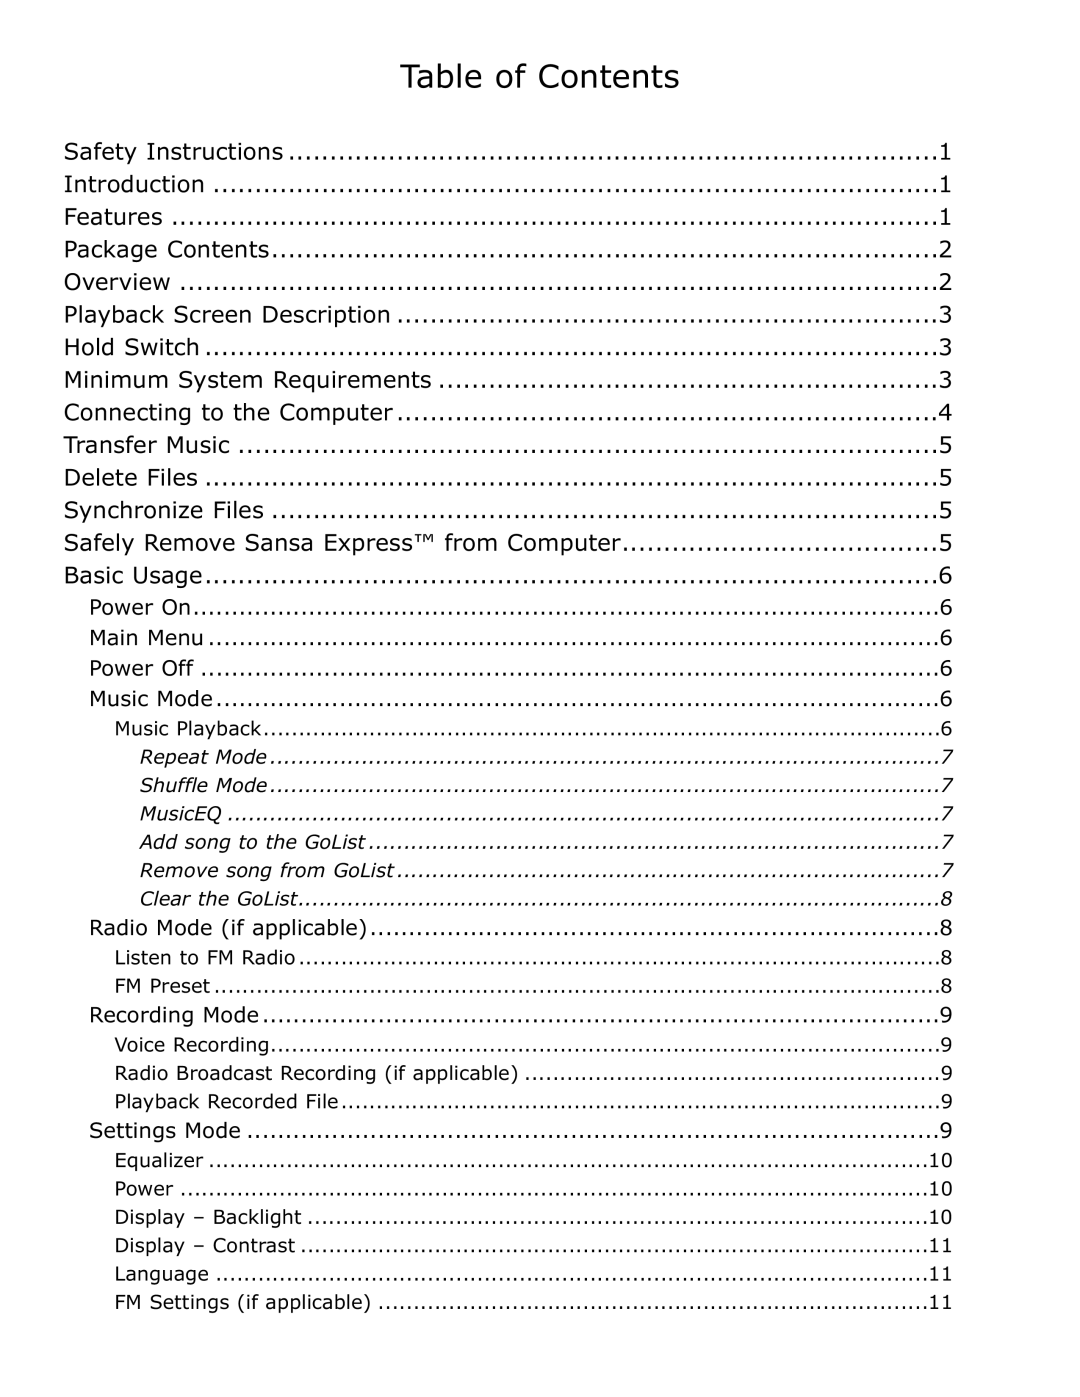 SanDisk c200 user manual Table of Contents 